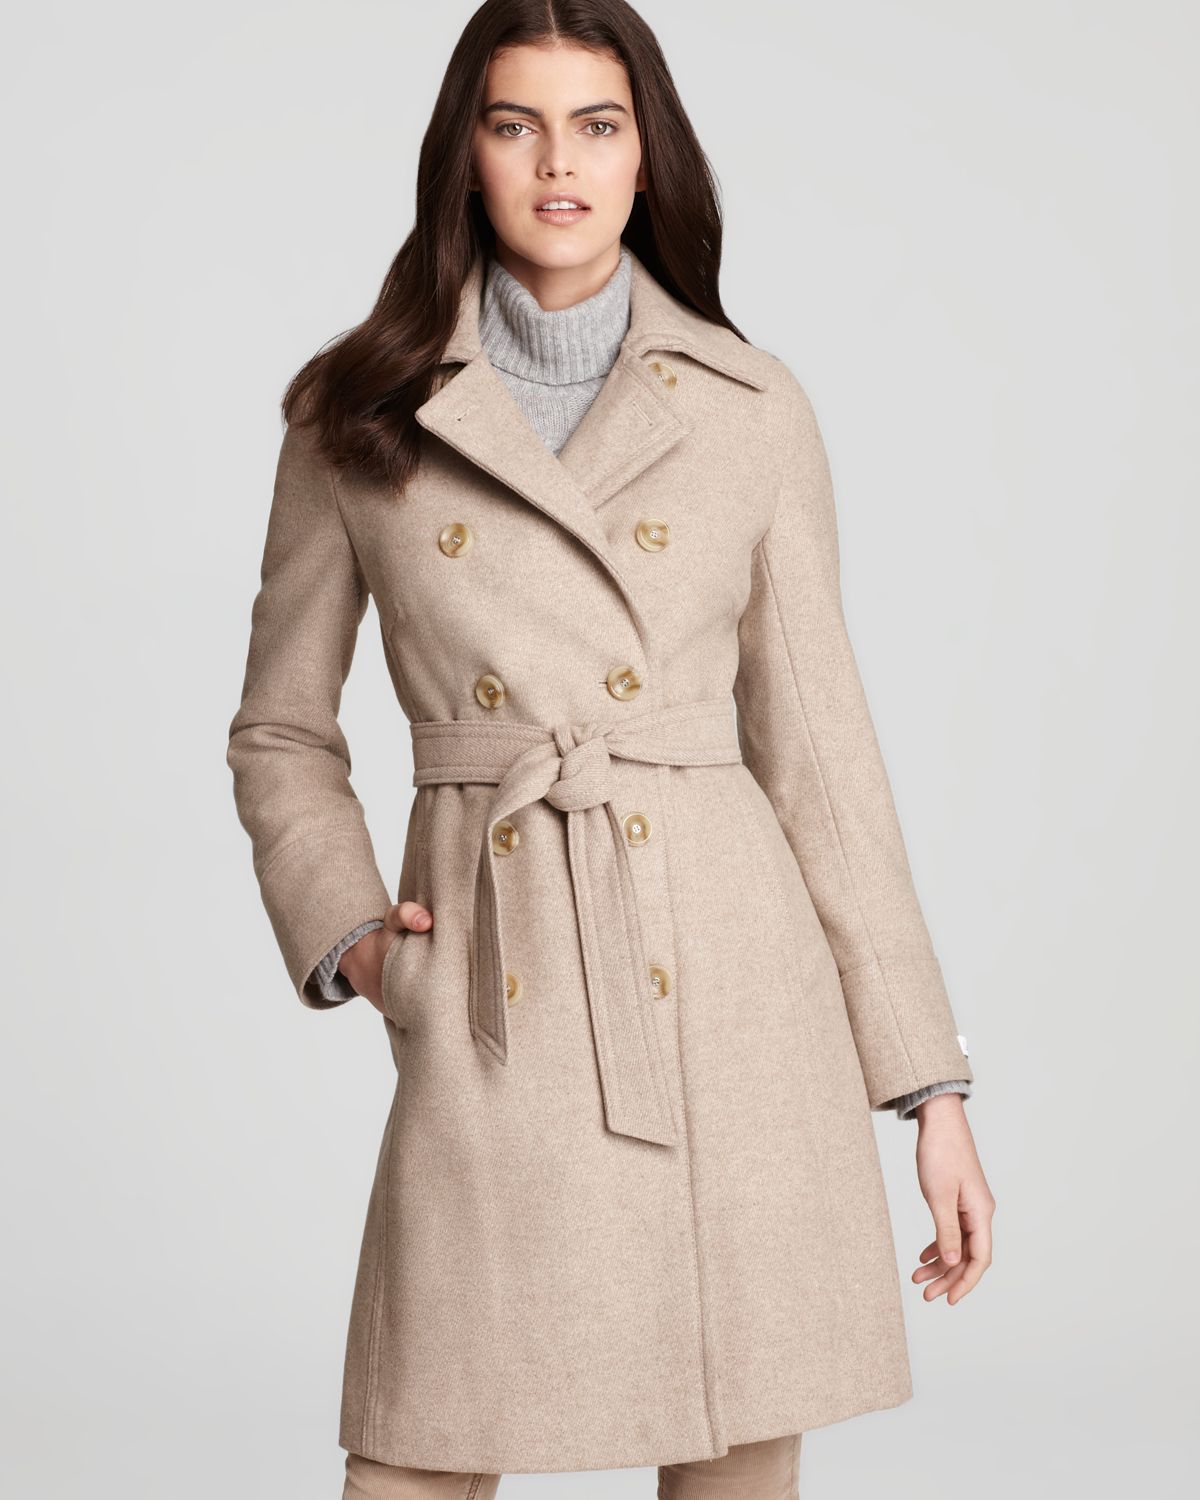 Calvin Klein Double Breasted Belted Trench Coat in Natural - Lyst